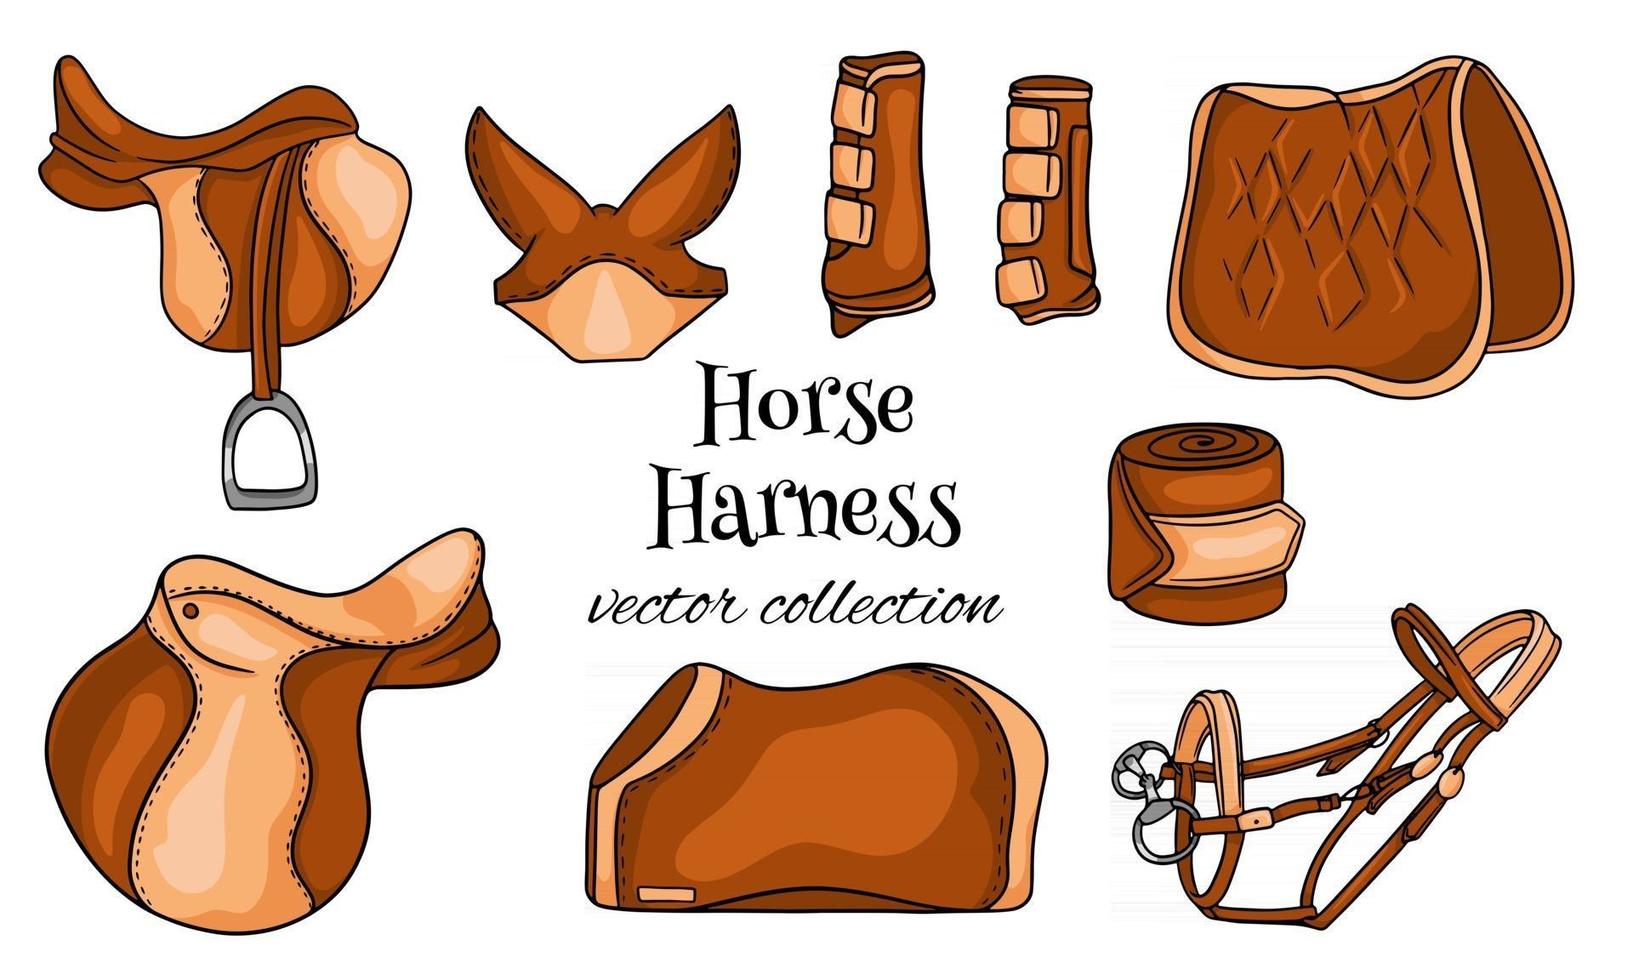 Horse harness a set of equestrian equipment saddle bridle blanket protective boots in cartoon style vector